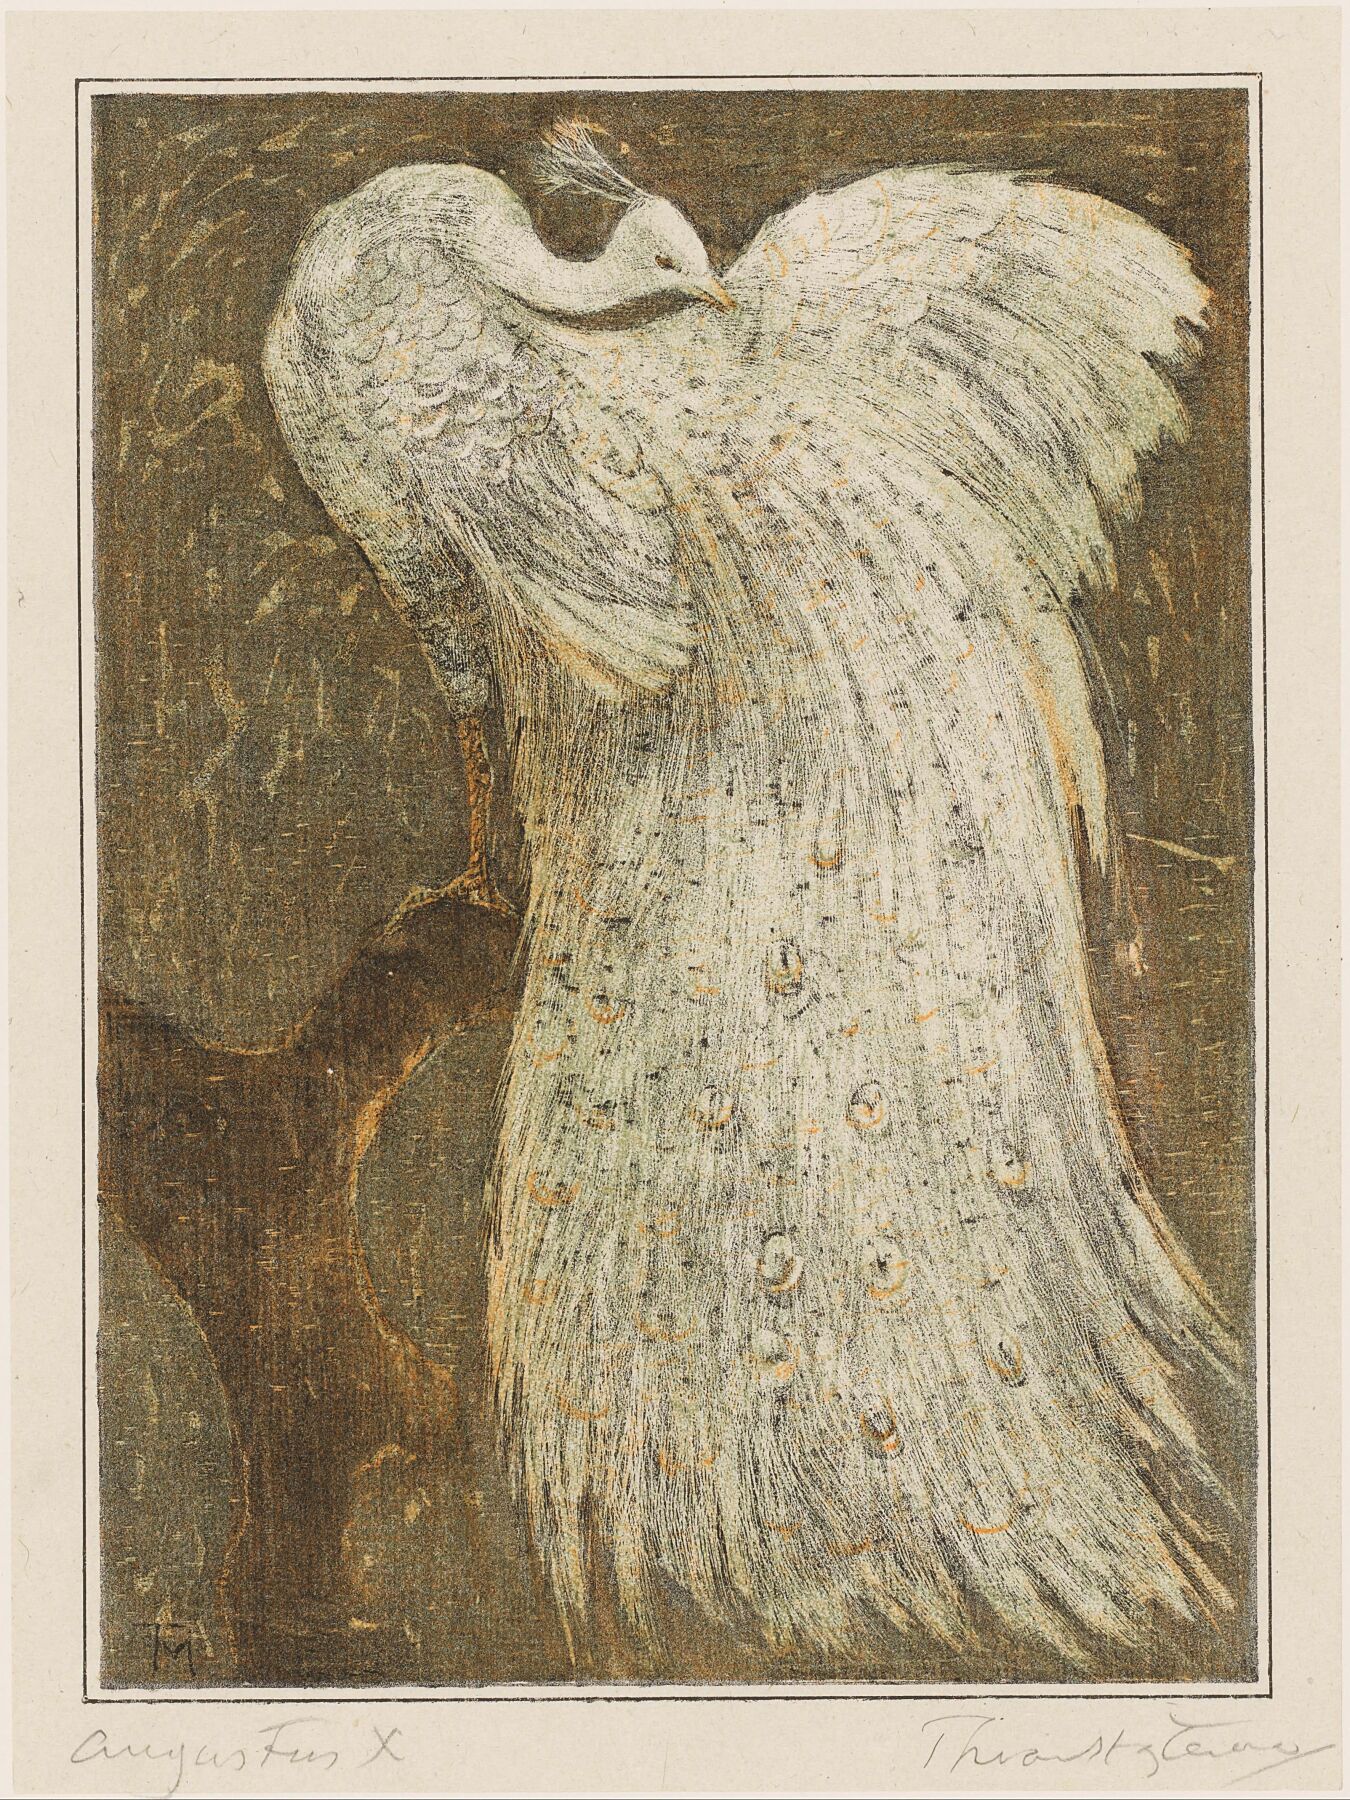 White Peacock on a Branch, Theo van Hoytema - c.1890